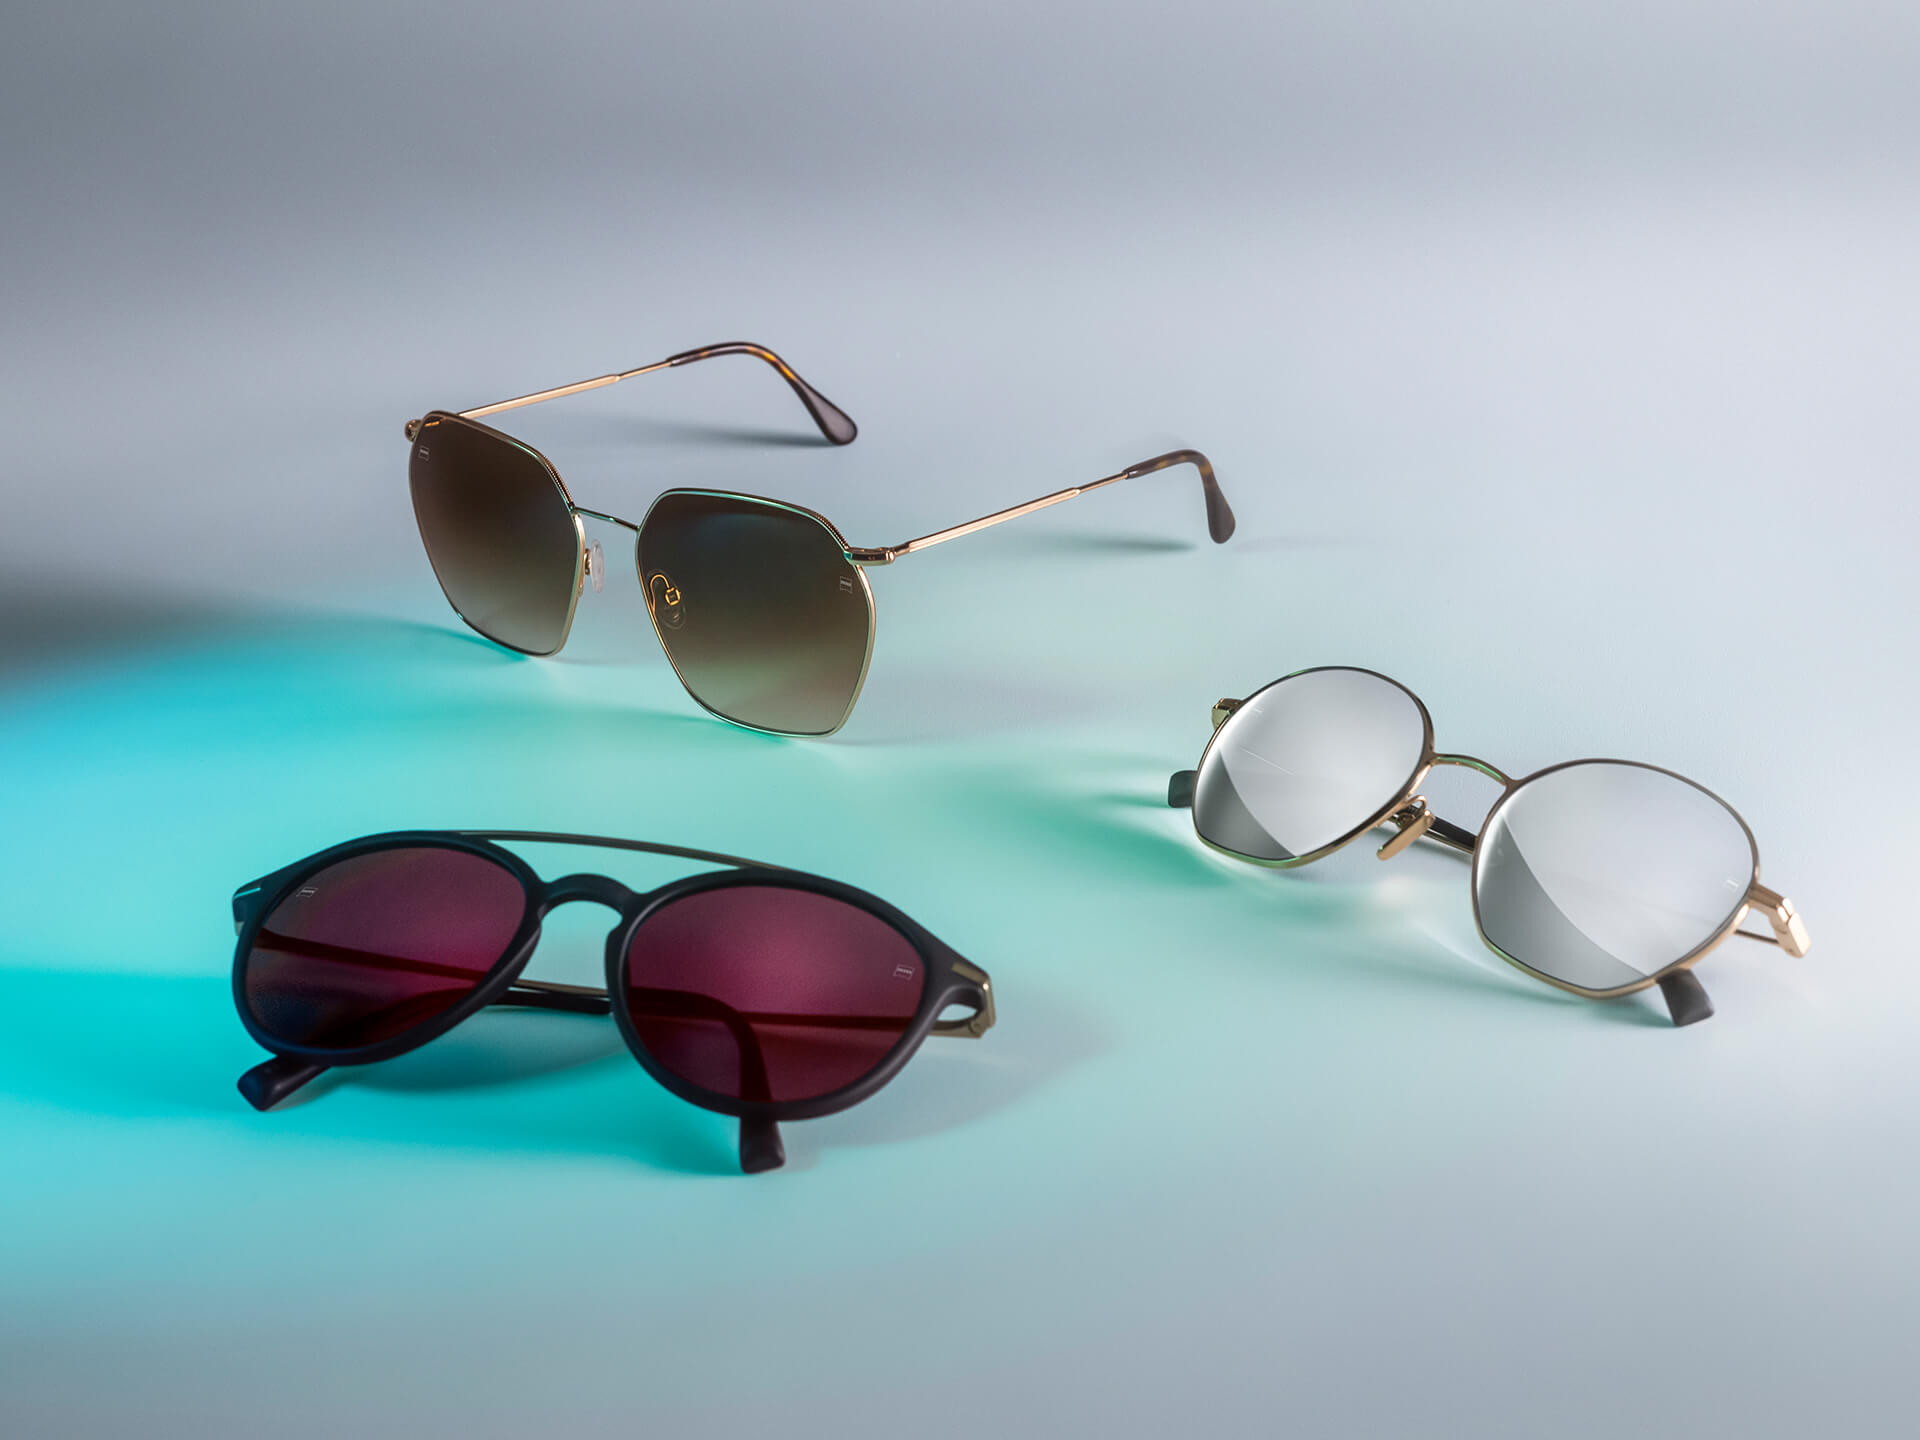 Three pairs of sunglasses with different colored ZEISS sunglass lenses, featuring DuraVision Sun, DuraVision Mirror and Flash Mirror coatings, visible on a white background with blue light reflection.